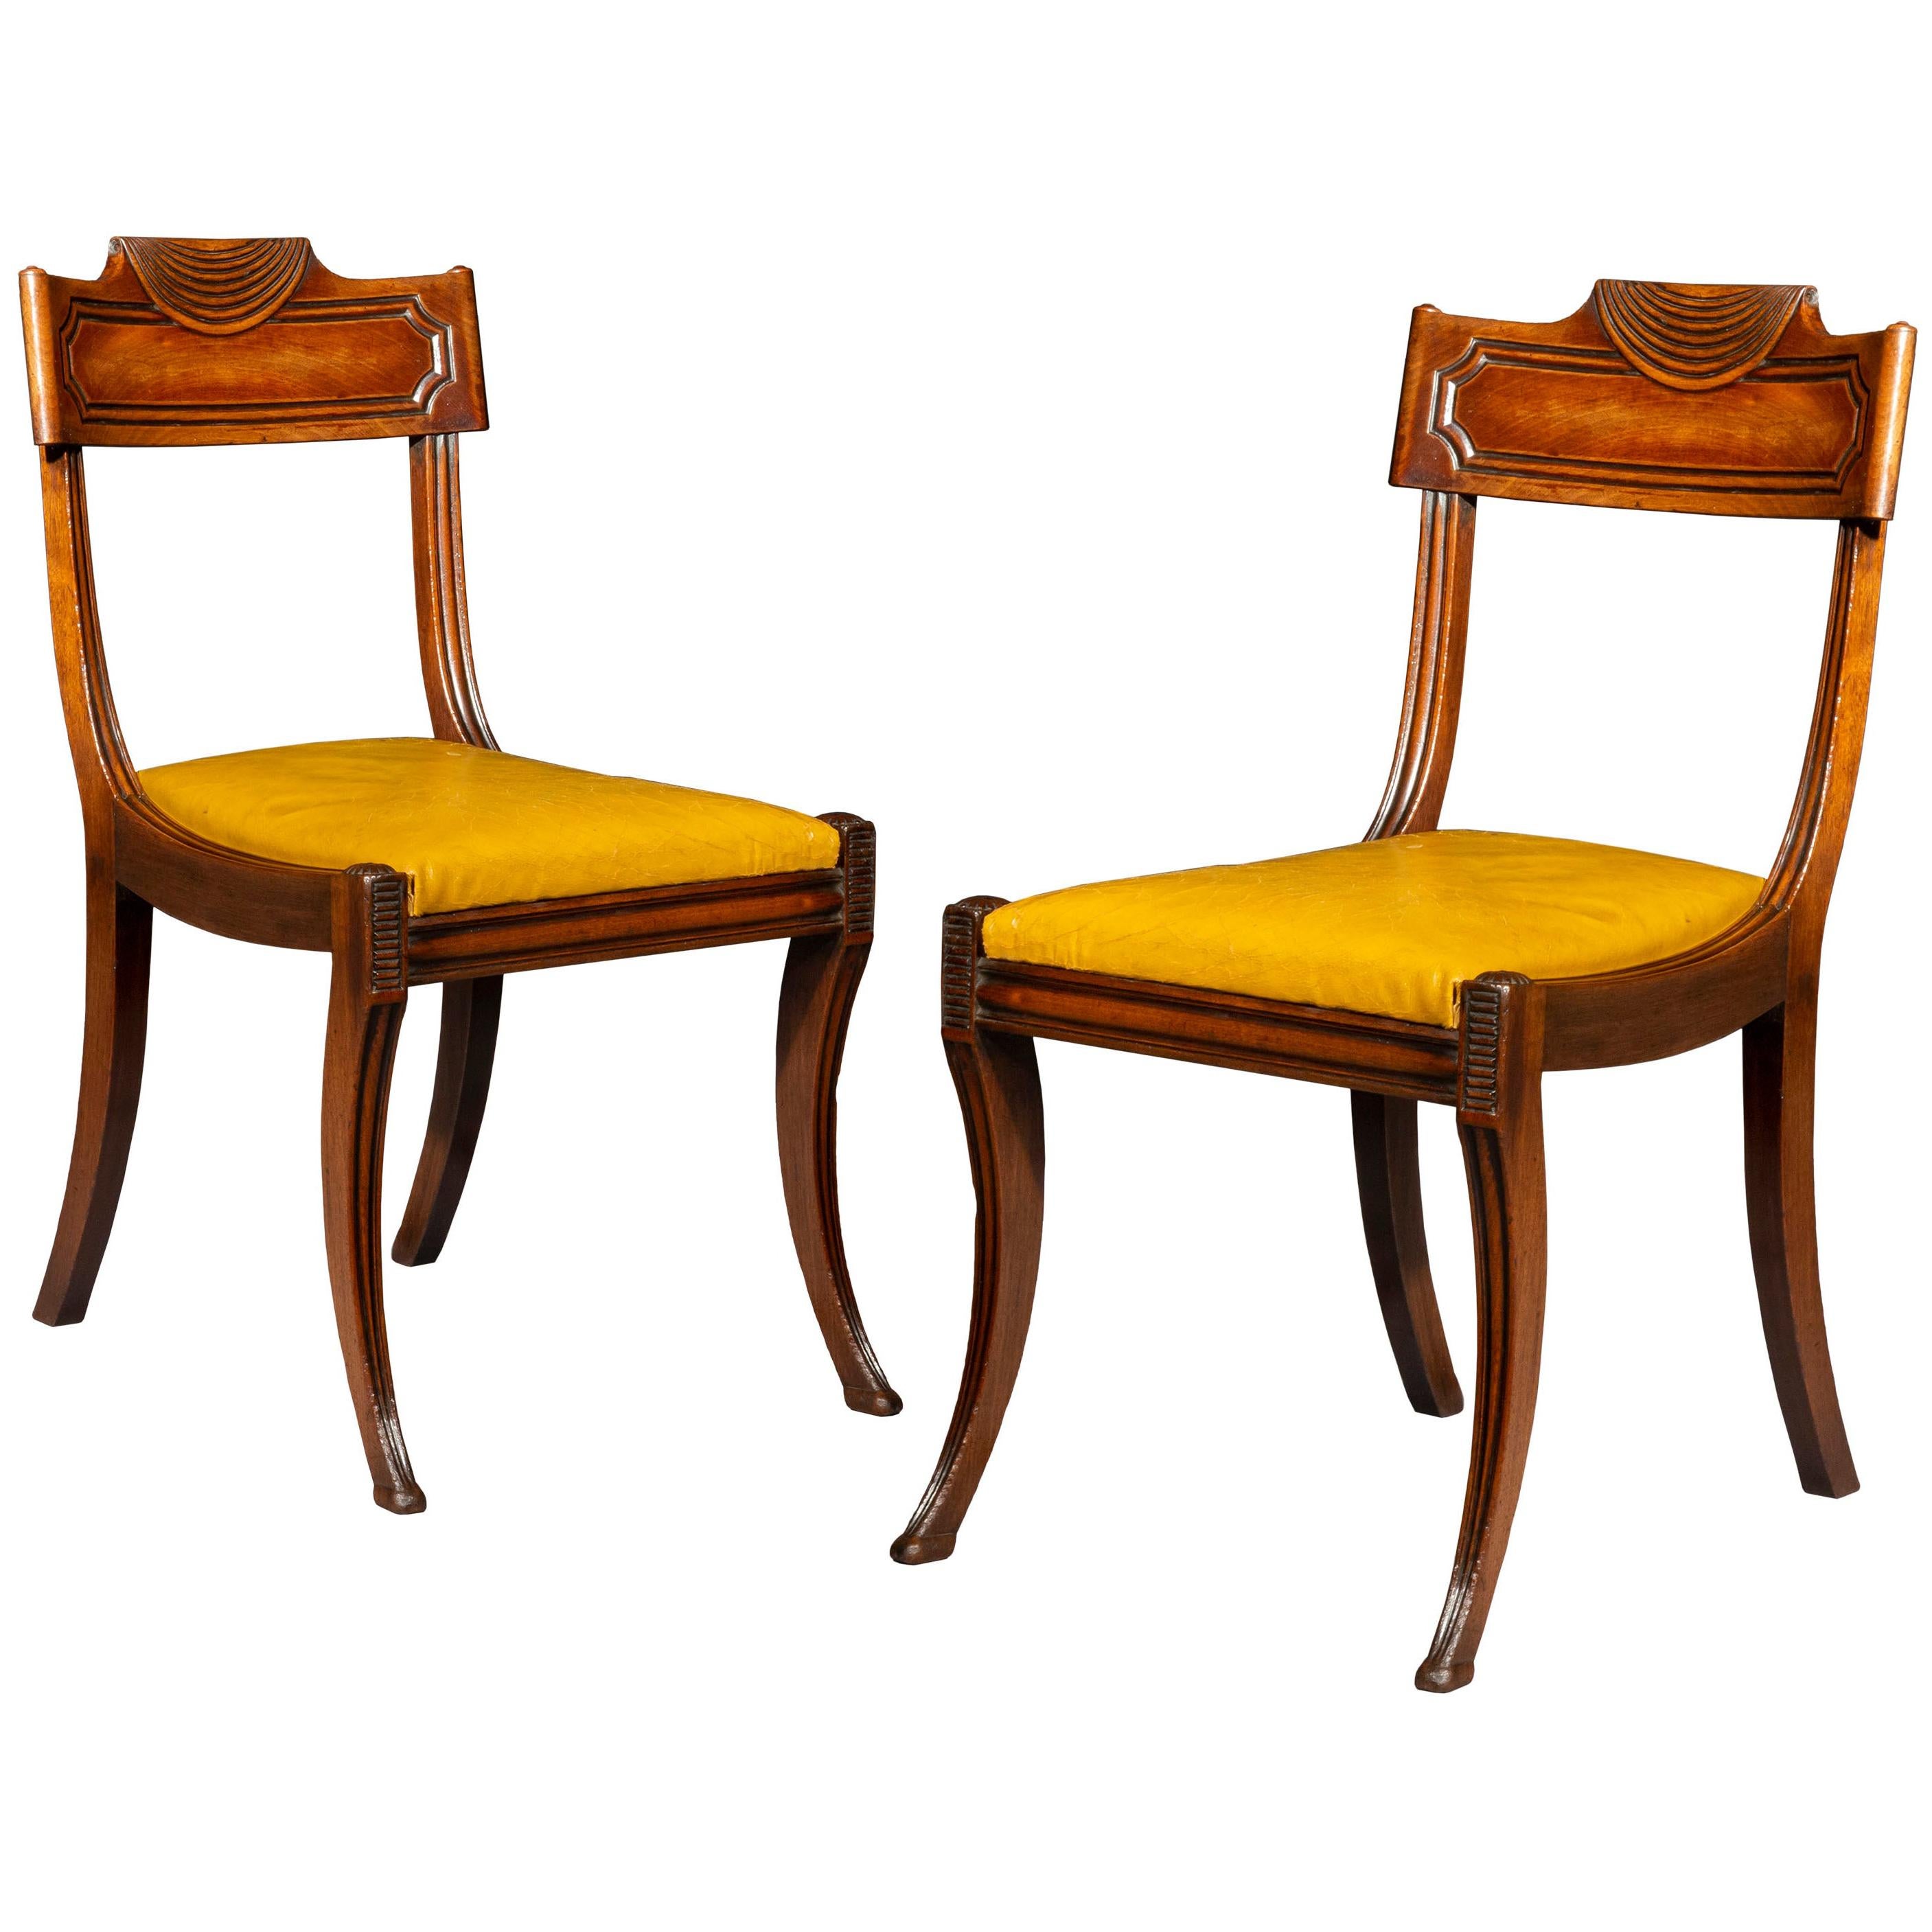 Pair of Antique Regency Klismos Chairs in the Manner of Marsh and Tatham